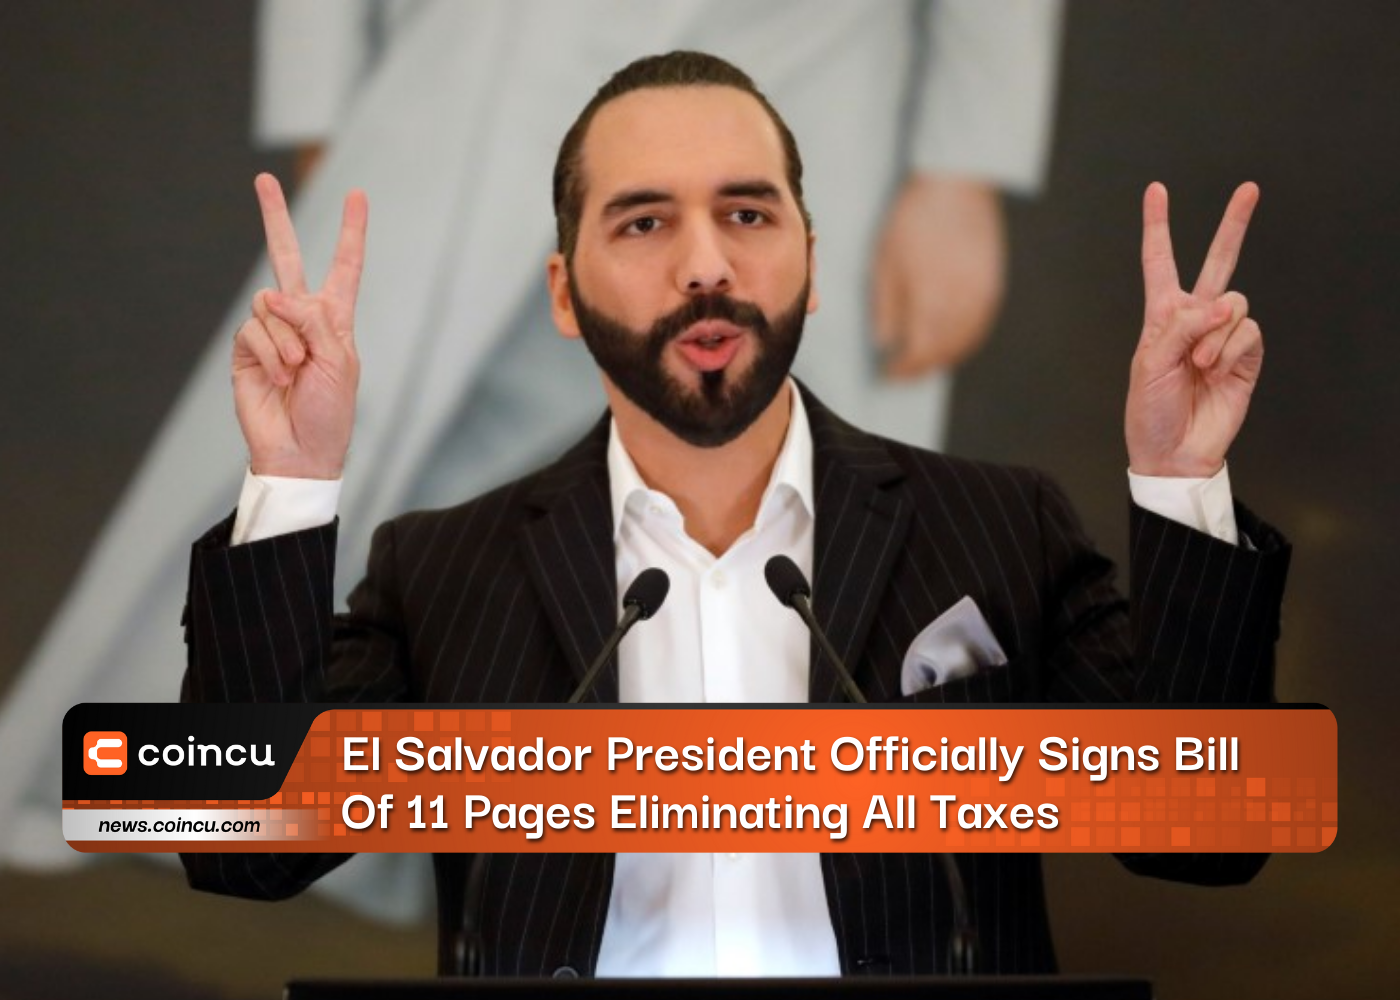 El Salvador President Officially Signs Bill Of 11 Pages Eliminating All Taxes